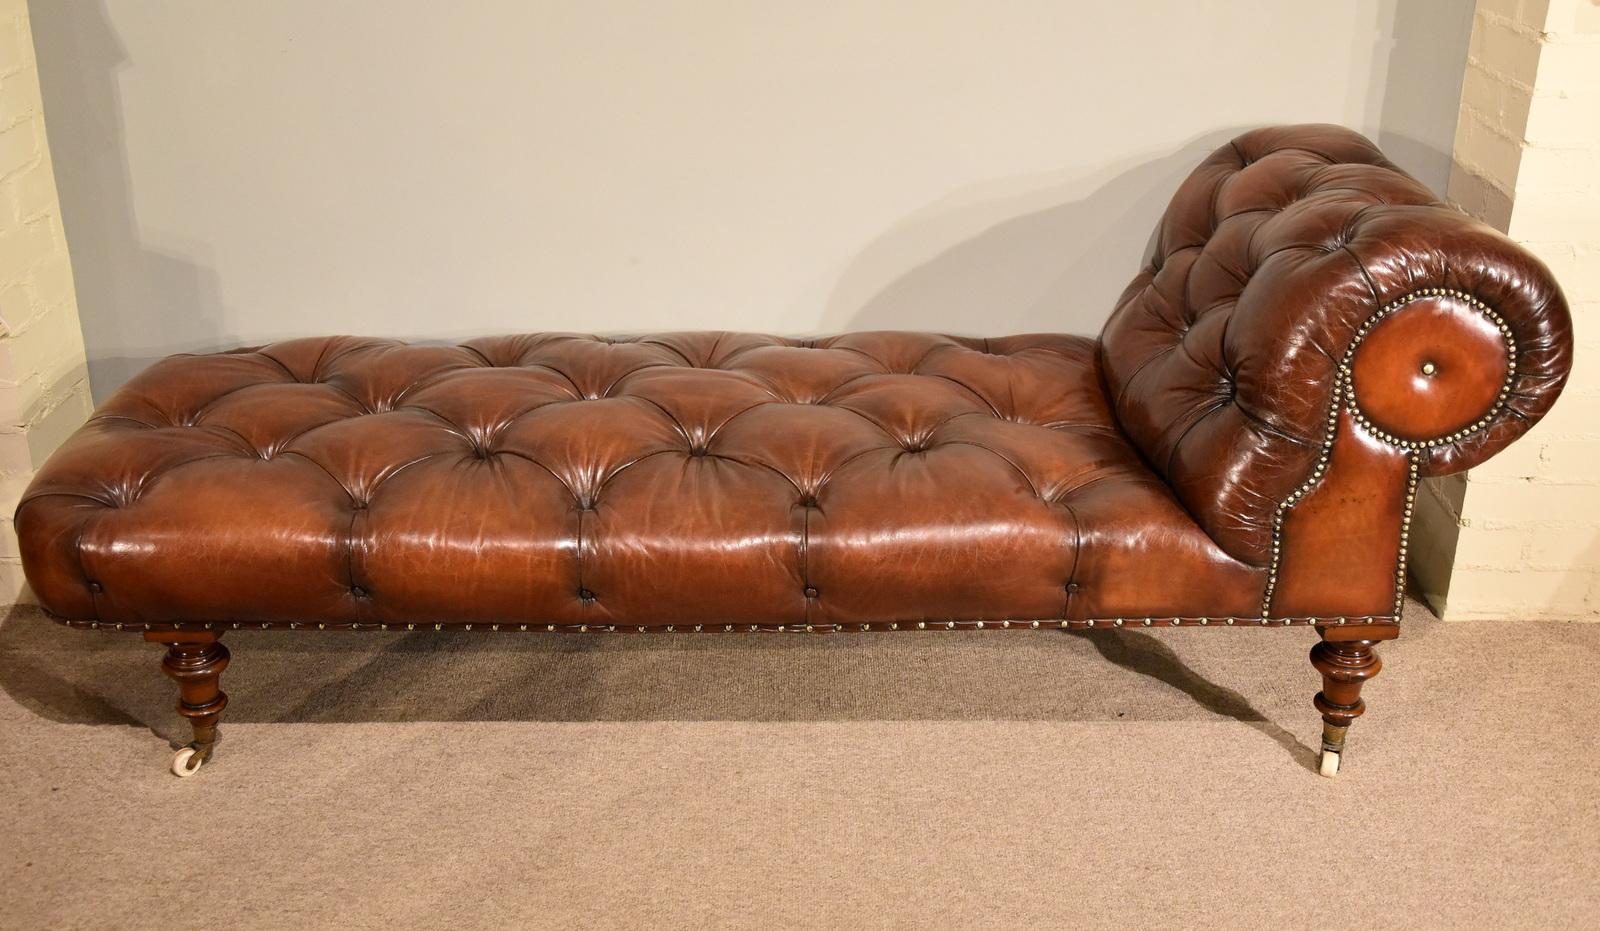 Stunning quality mid-19th century walnut chaise reupholstered in deep buttoned chestnut antiqued leather with brass studs

Dimensions:
Height 30